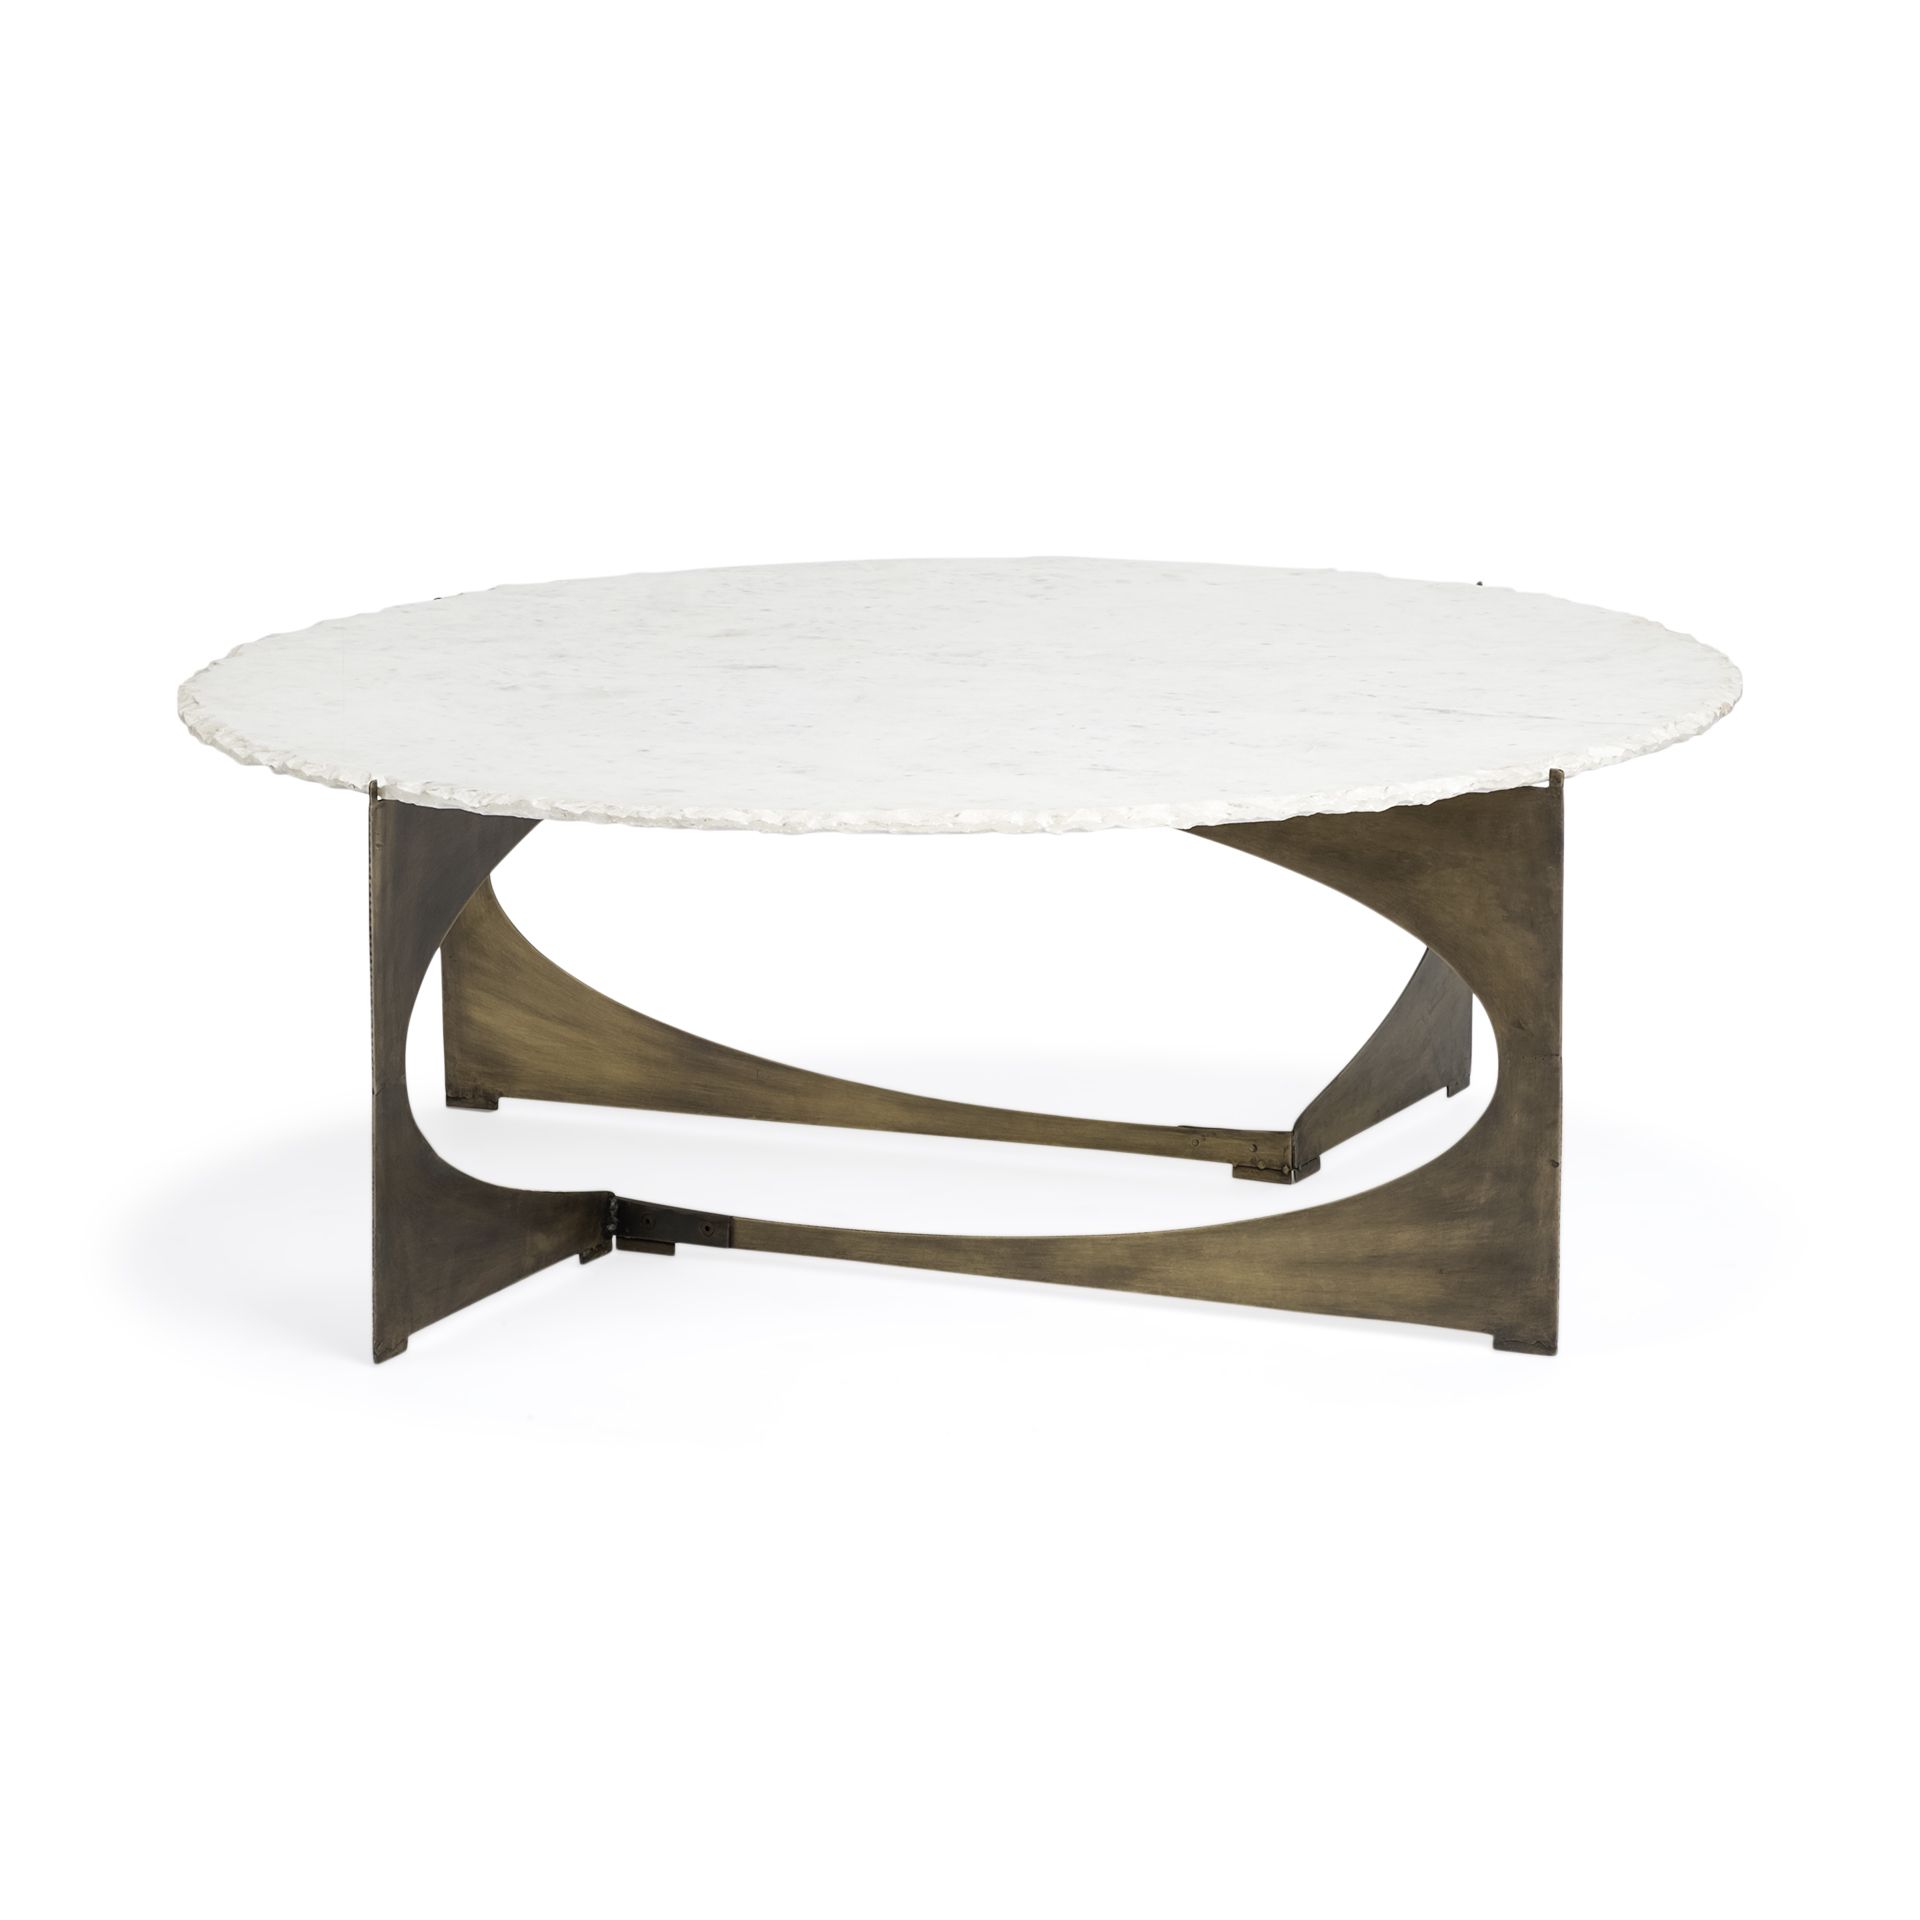 Reinhold I 49" Round White Marble Top Gold Metal Base For Fashionable Faux White Marble And Metal Coffee Tables (View 5 of 20)